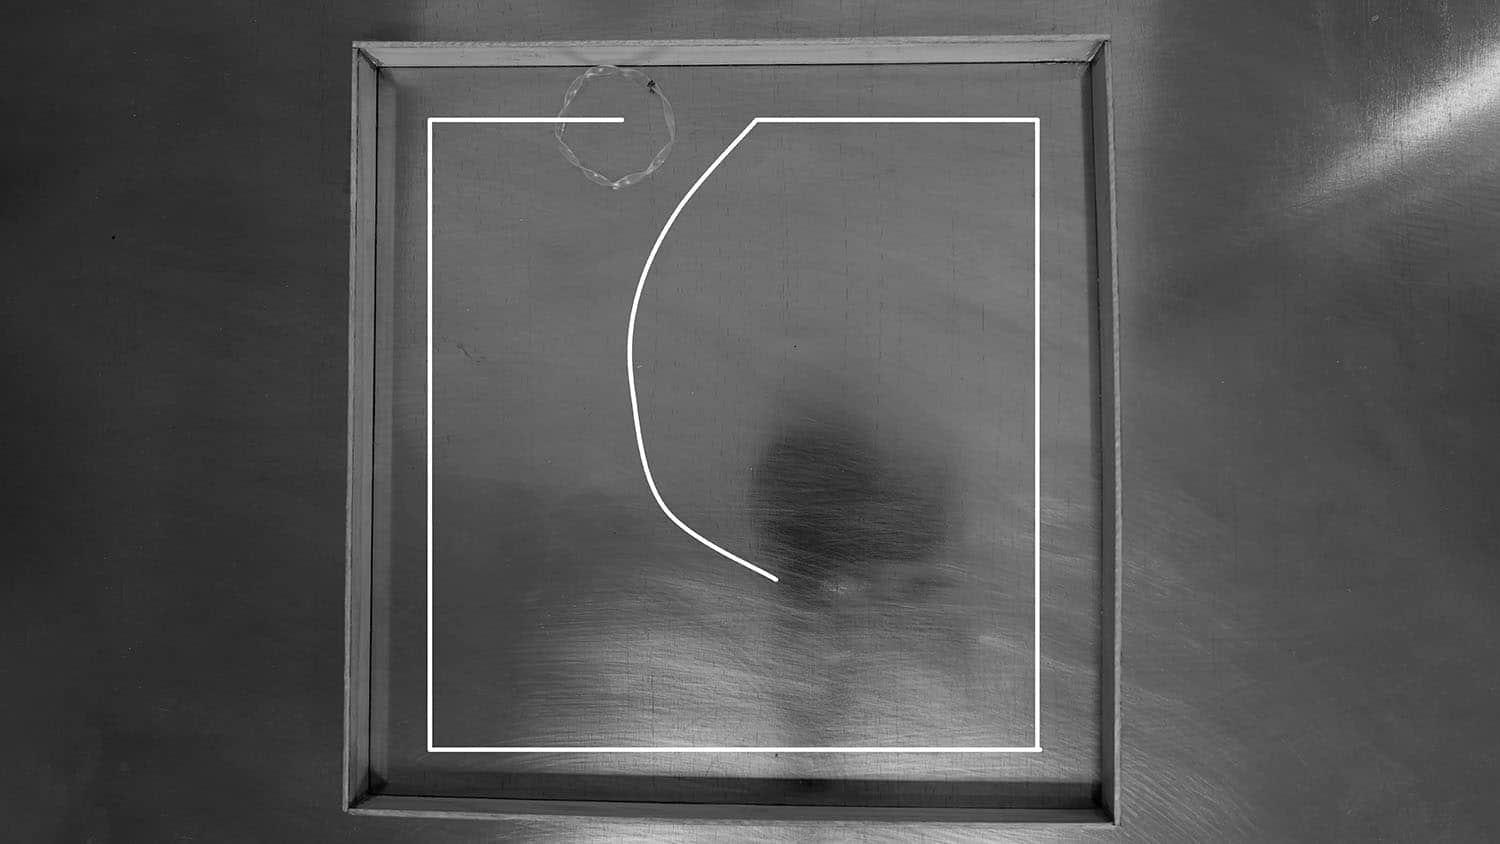 black-and-white video still shows a ringlike object in a square space that has one gap for an entrance. A bright white line shows the path that the object has taken in tracing the contours of the space.